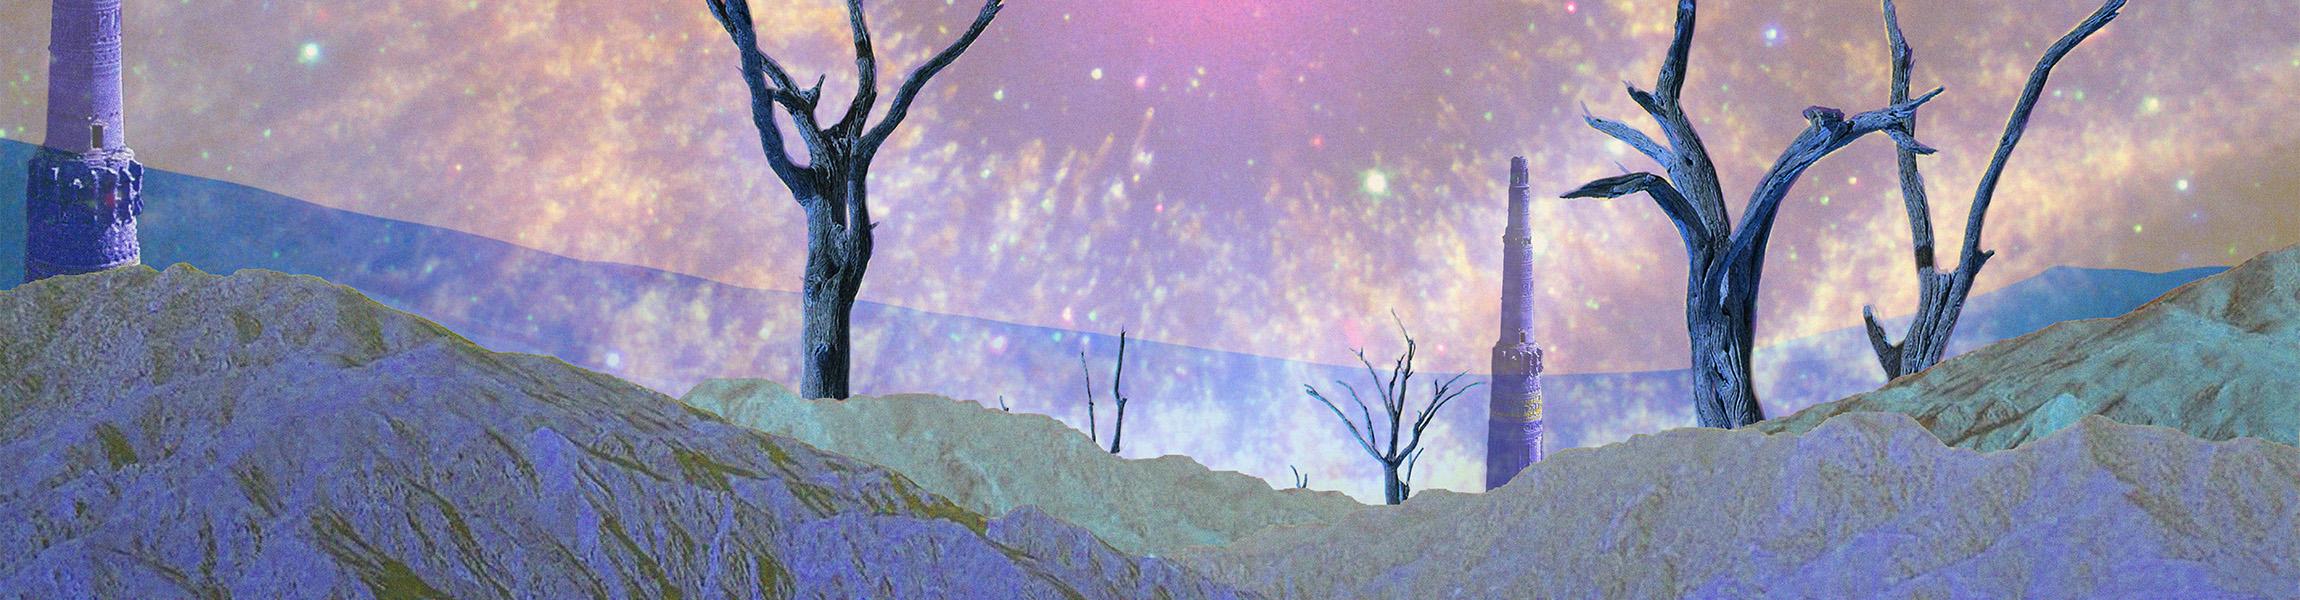 Digital collage of an arid, mountainous landscape meeting a glowing, starry sky. Large dead trees and obelisks reach for the sky.